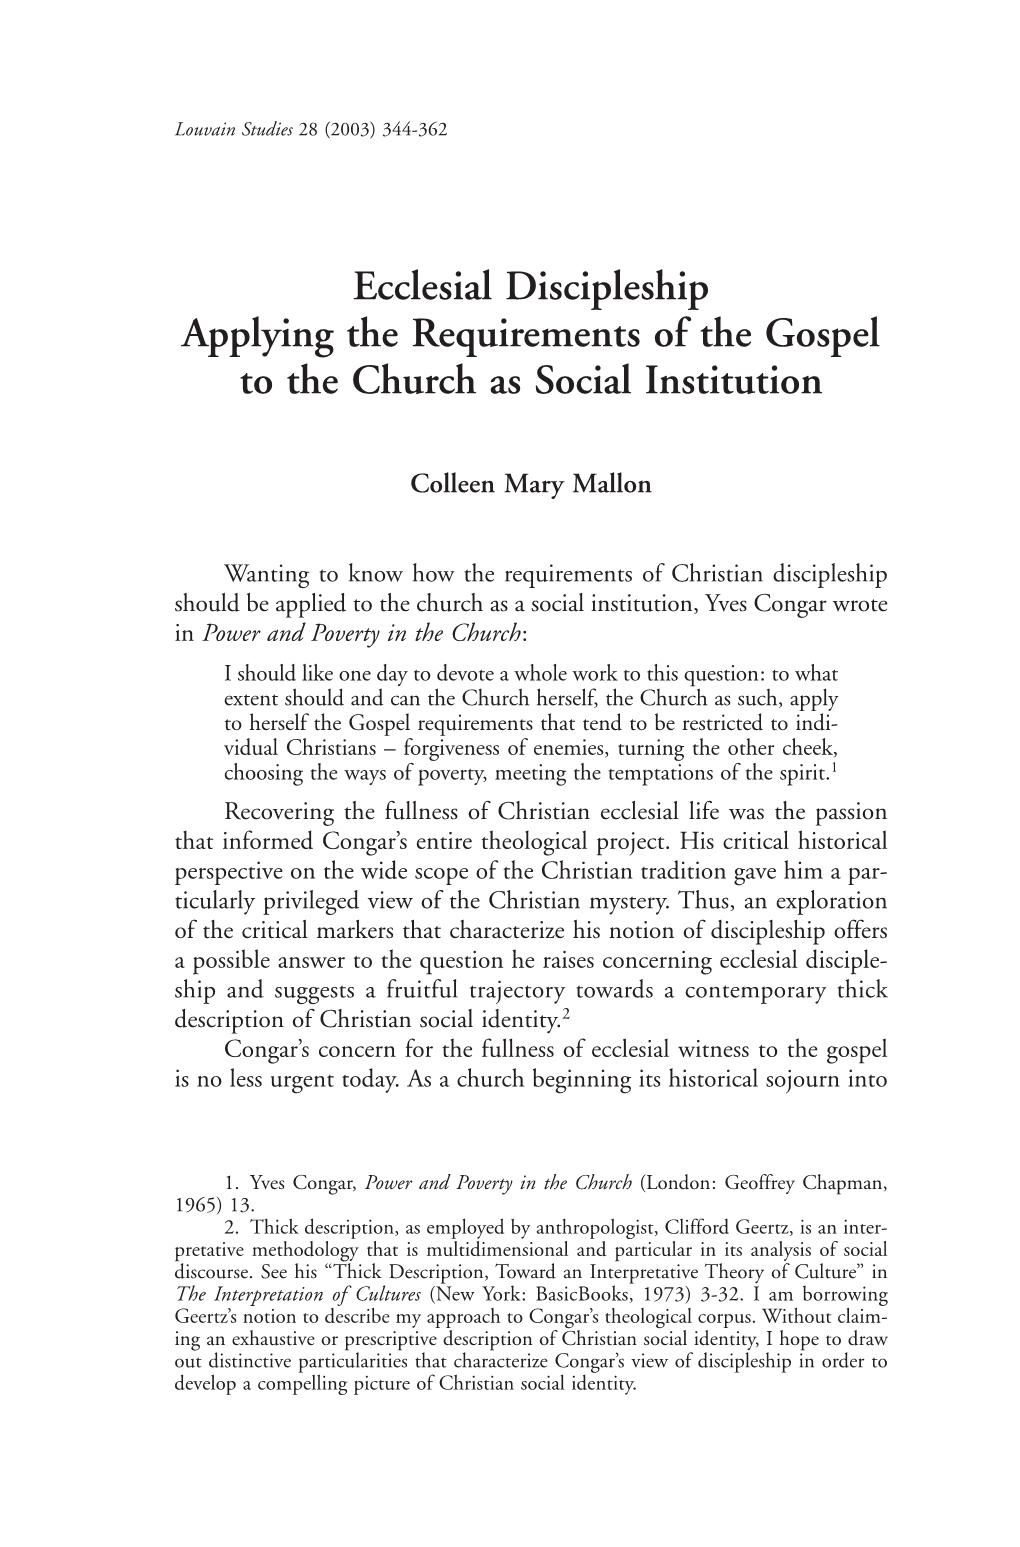 Ecclesial Discipleship Applying the Requirements of the Gospel to the Church As Social Institution